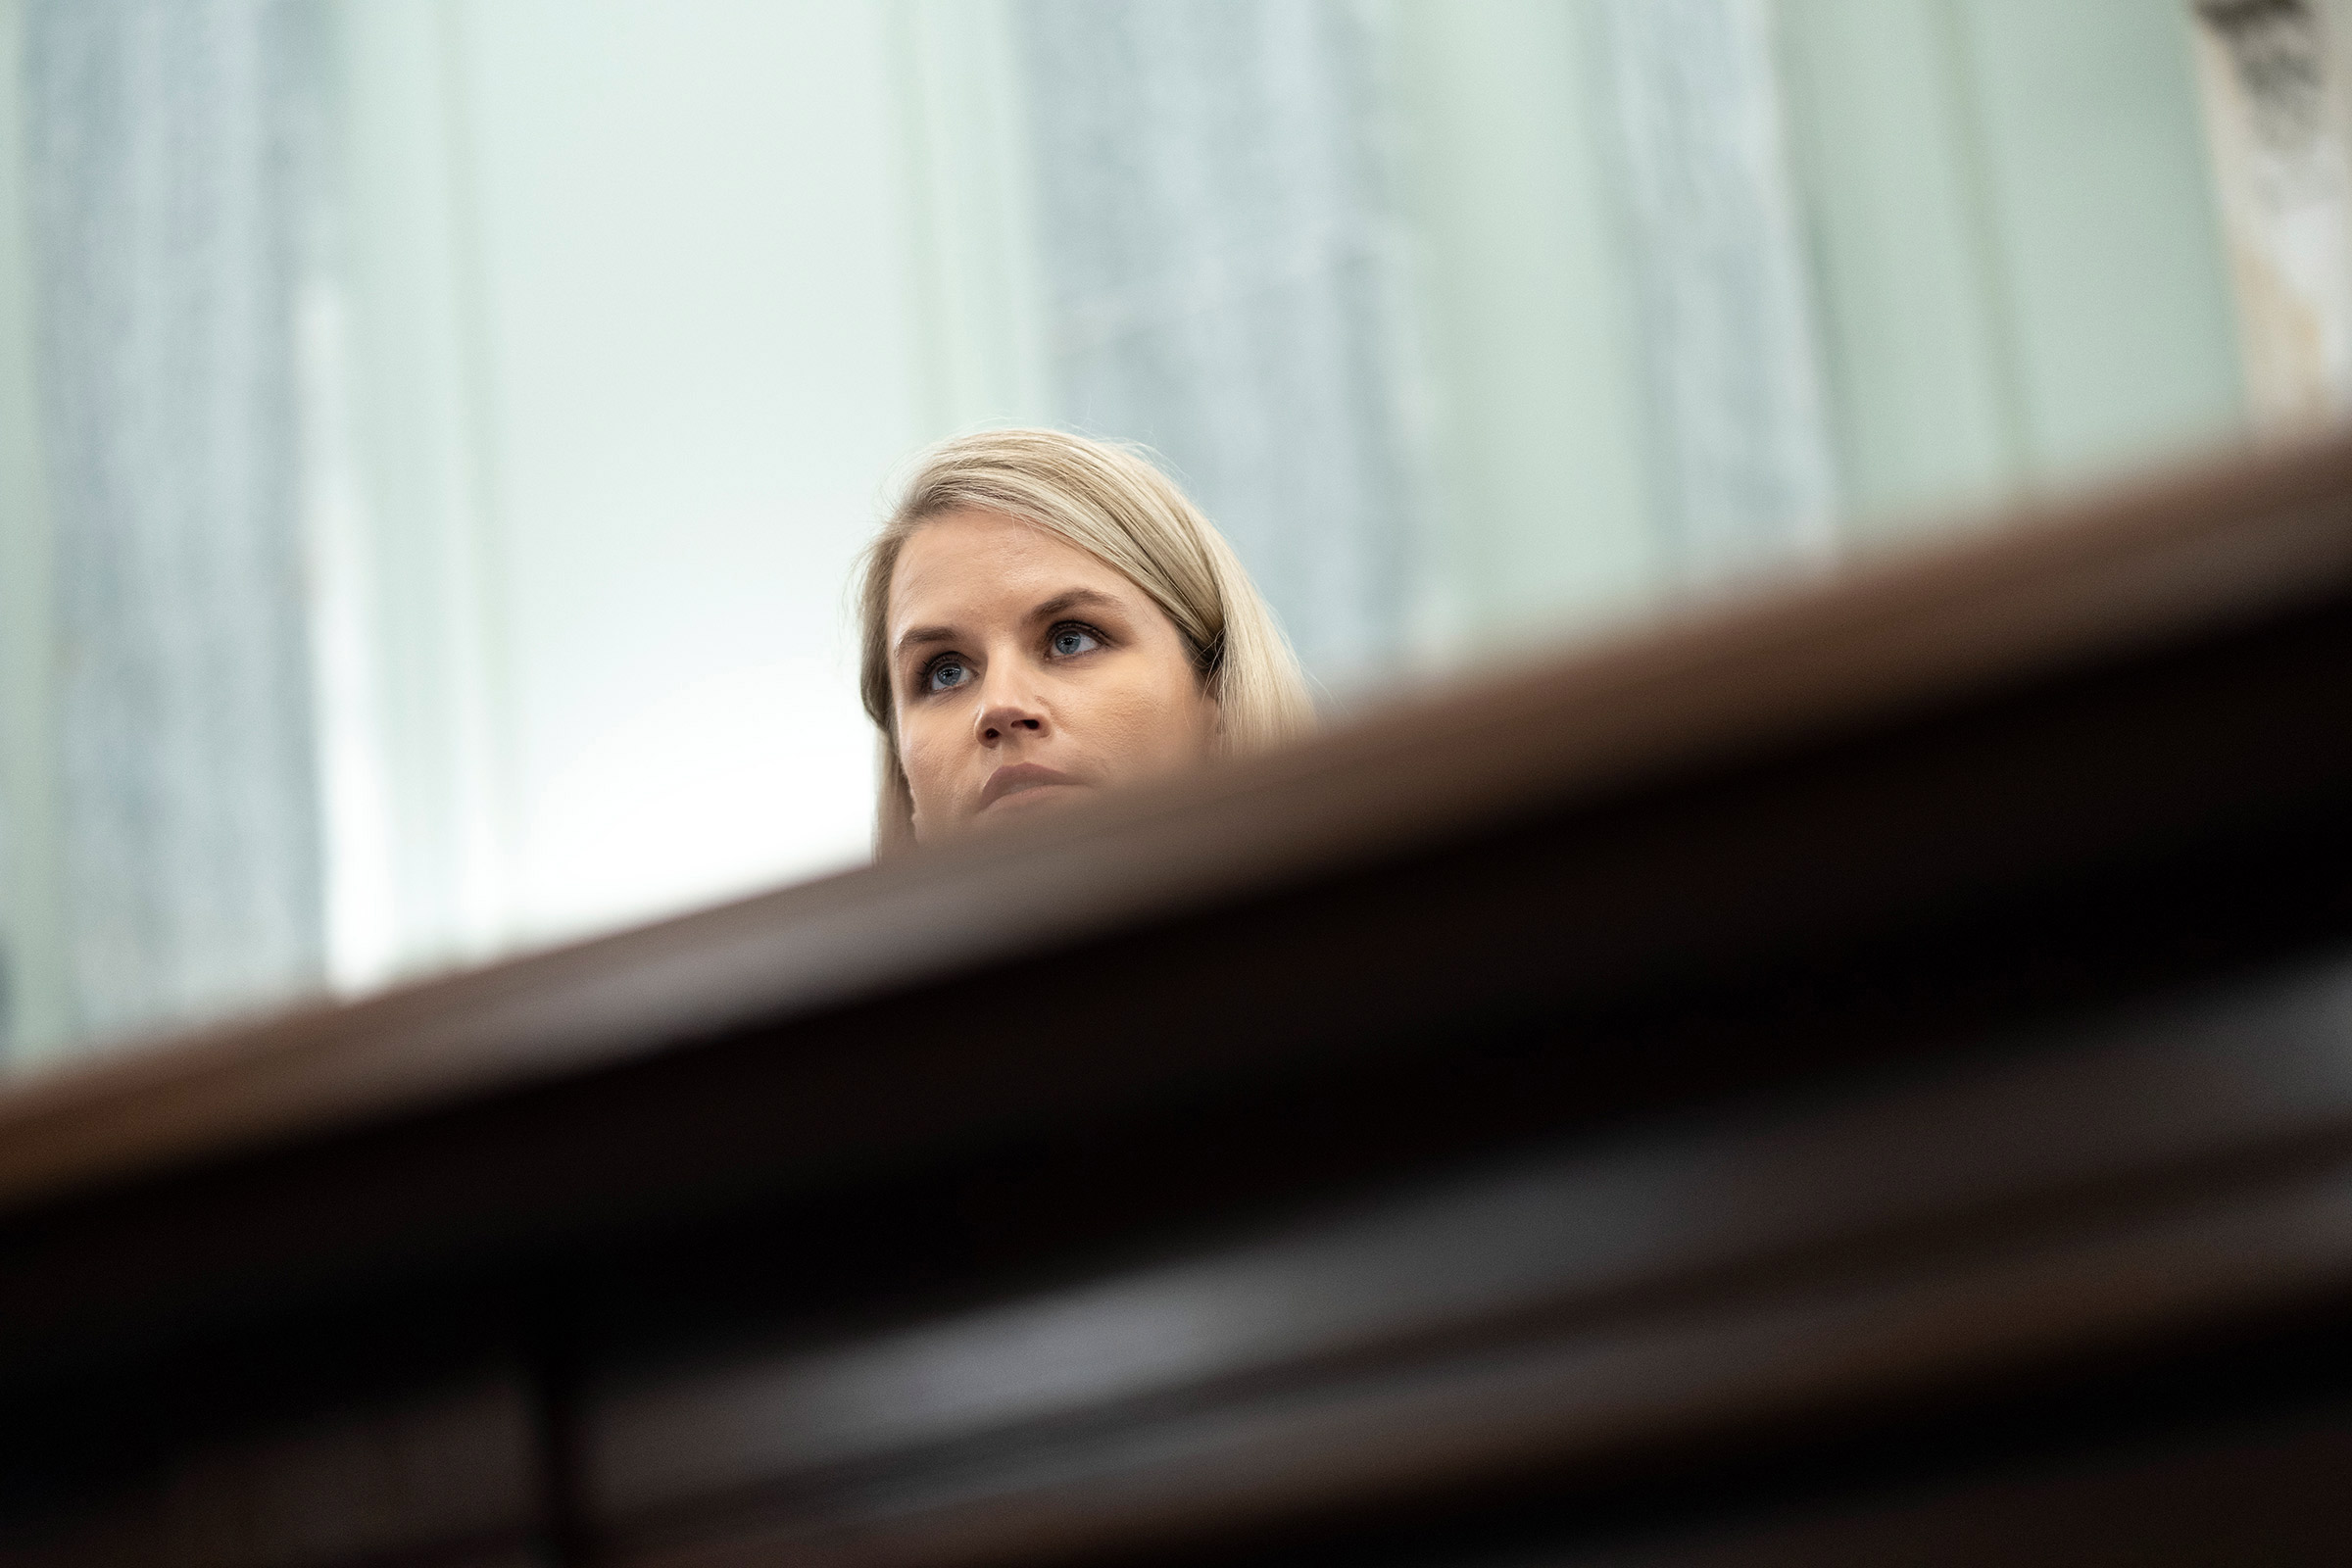 Former Facebook employee Frances Haugen testifies during a Senate hearing entitled 'Protecting Kids Online: Testimony from a Facebook Whistleblower' in Washington, D.C., Oct. 5, 2021. (Drew Angerer—Getty Images)